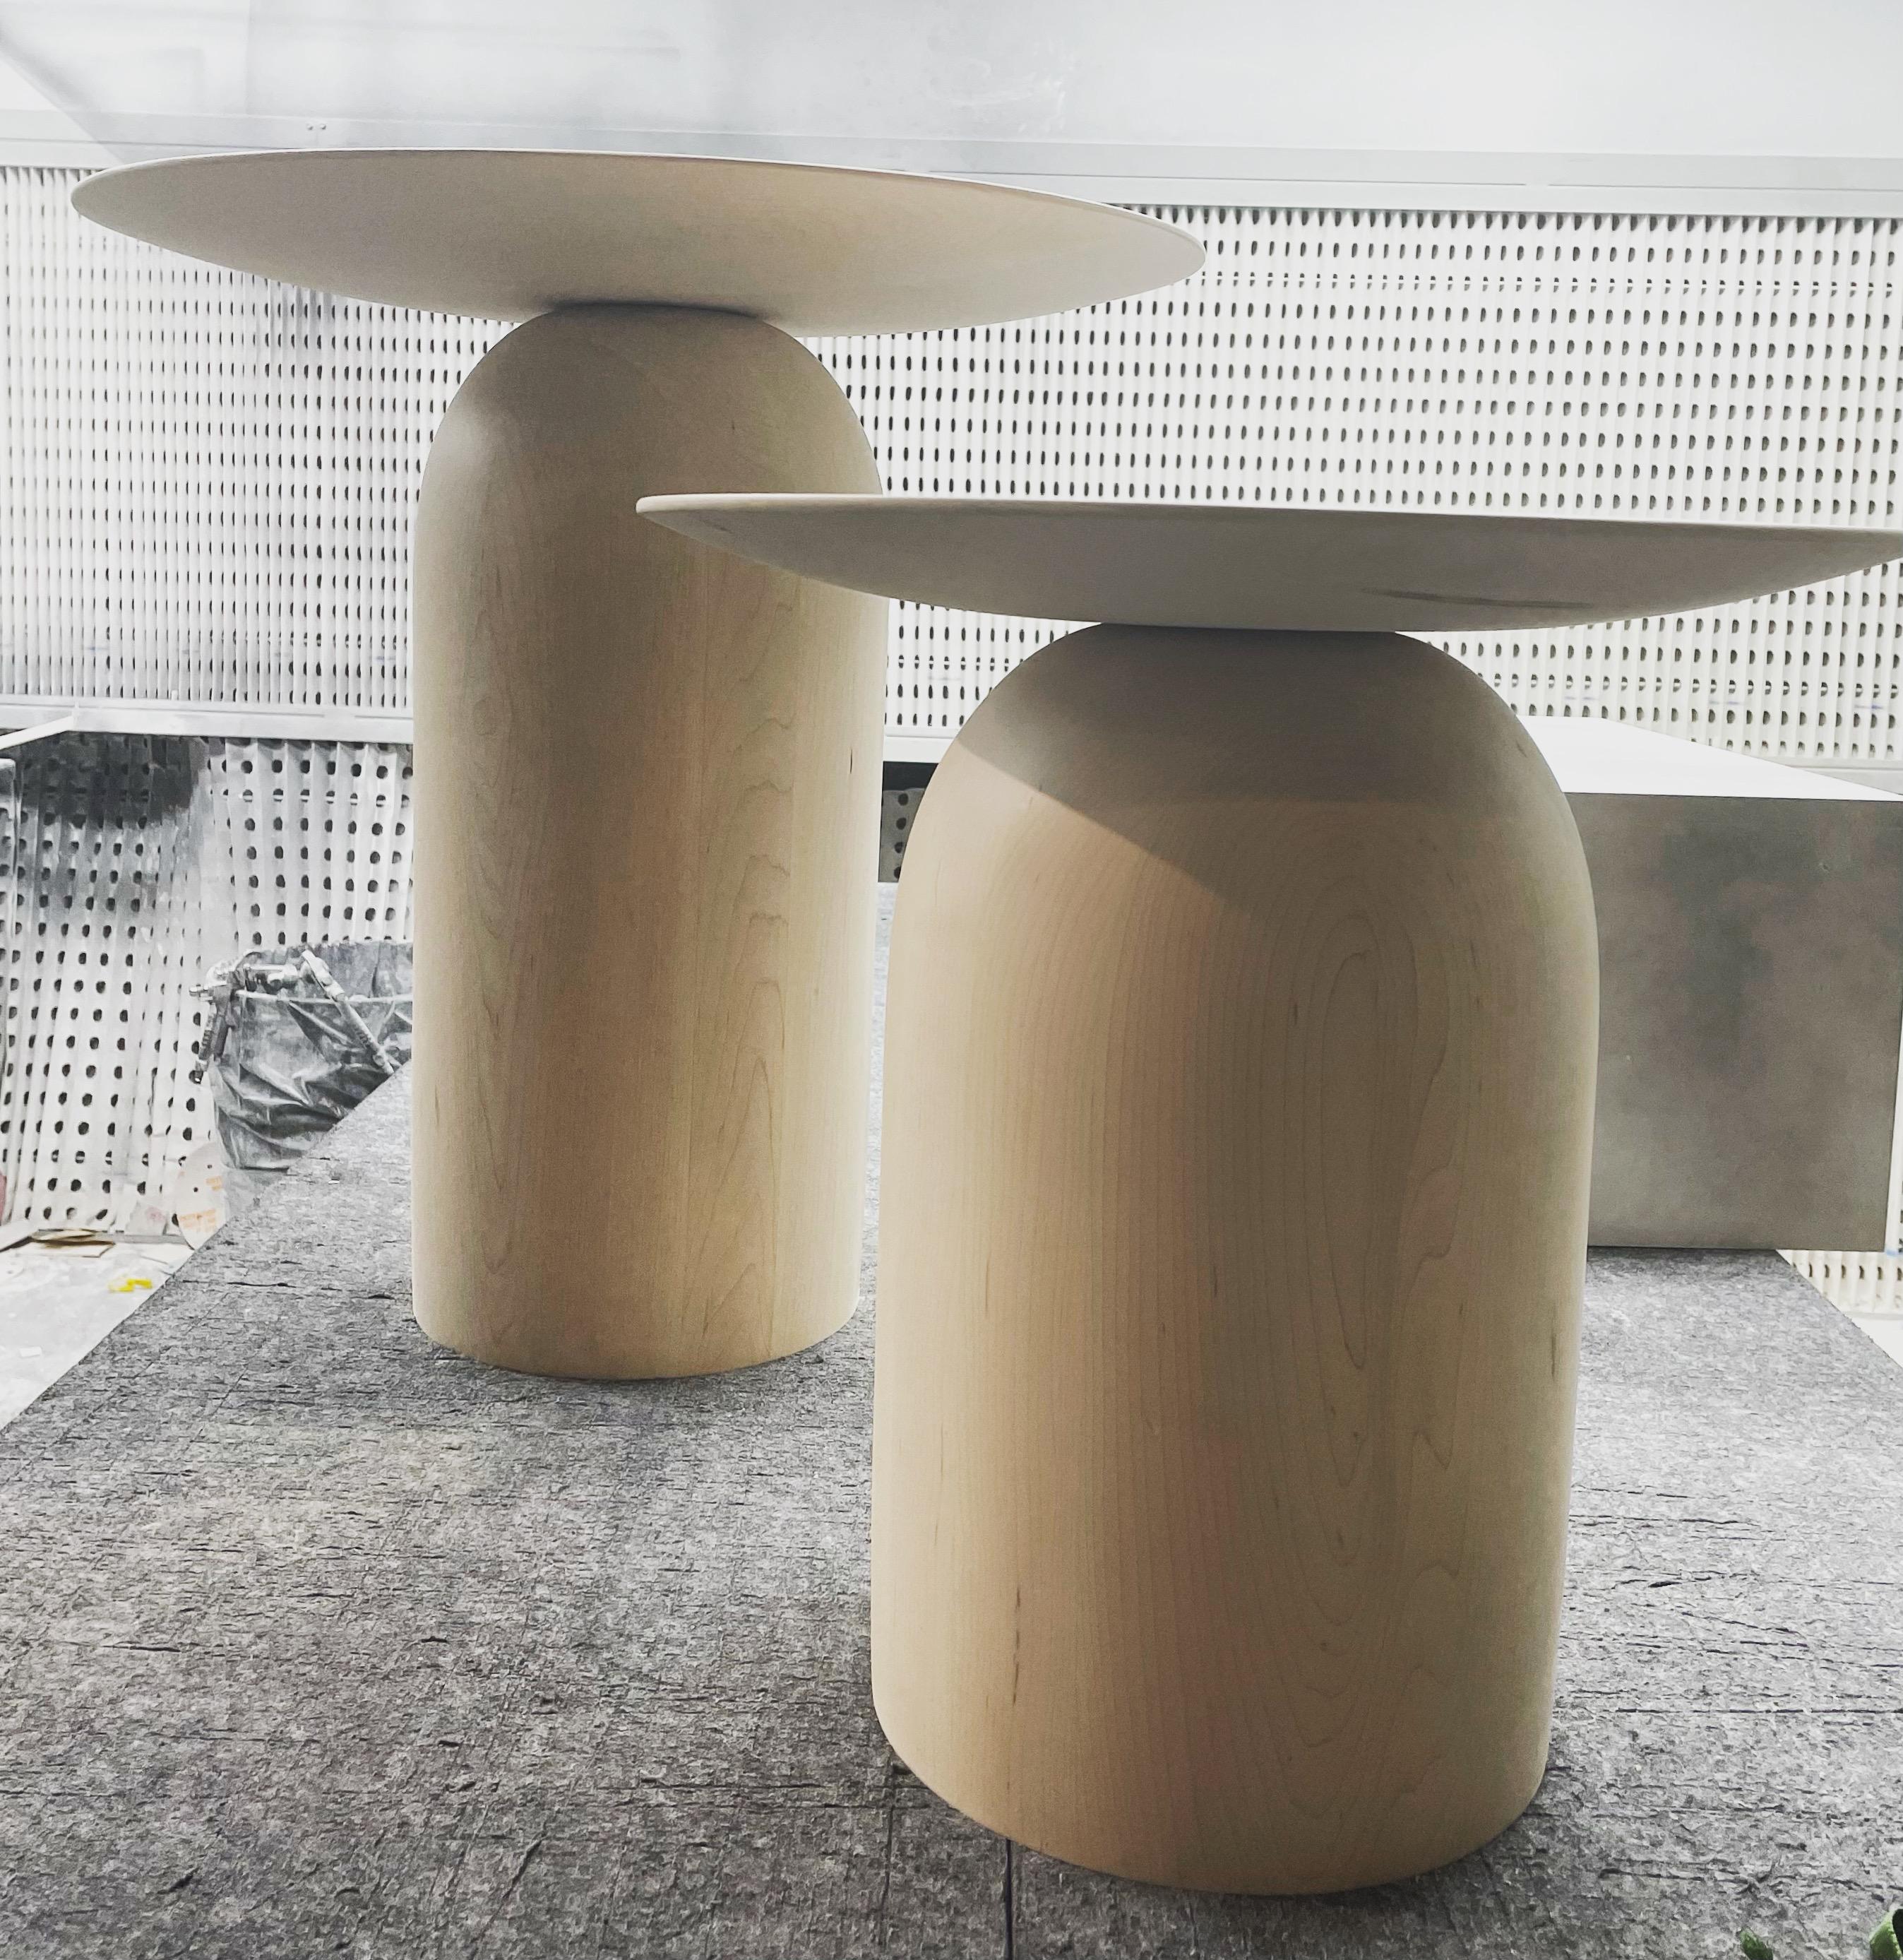 EGG Side Table is an original, artisanal example of 21st century organic design.
Its minimal shape is inspired by 20th century Arp and Brancusi sculptures.  
EGG Side Table is hand built and made on a single lathe by master craftsmen in Australia,